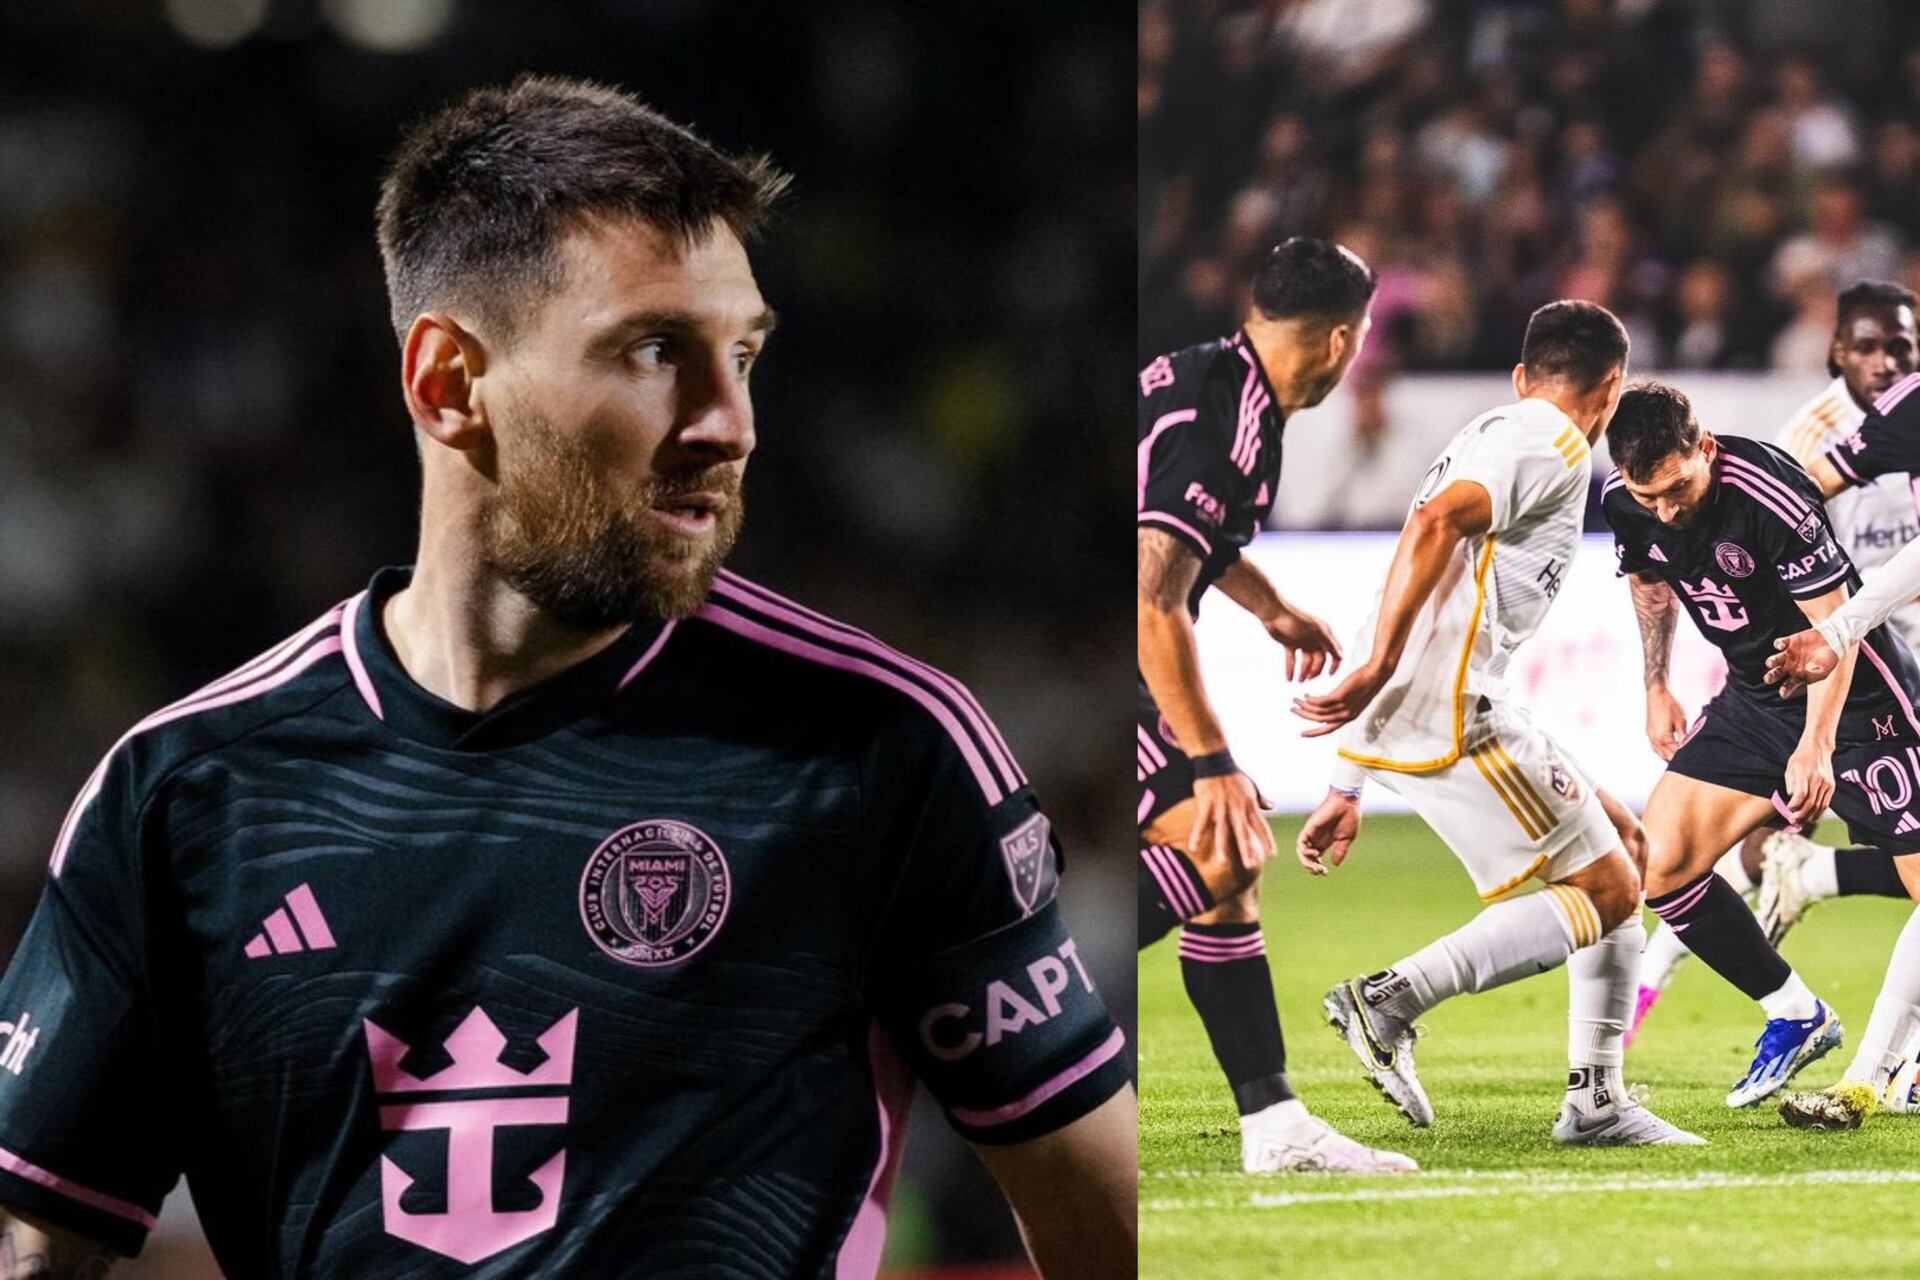 The LA Galaxy players that couldn't hold their excitement to play against Messi